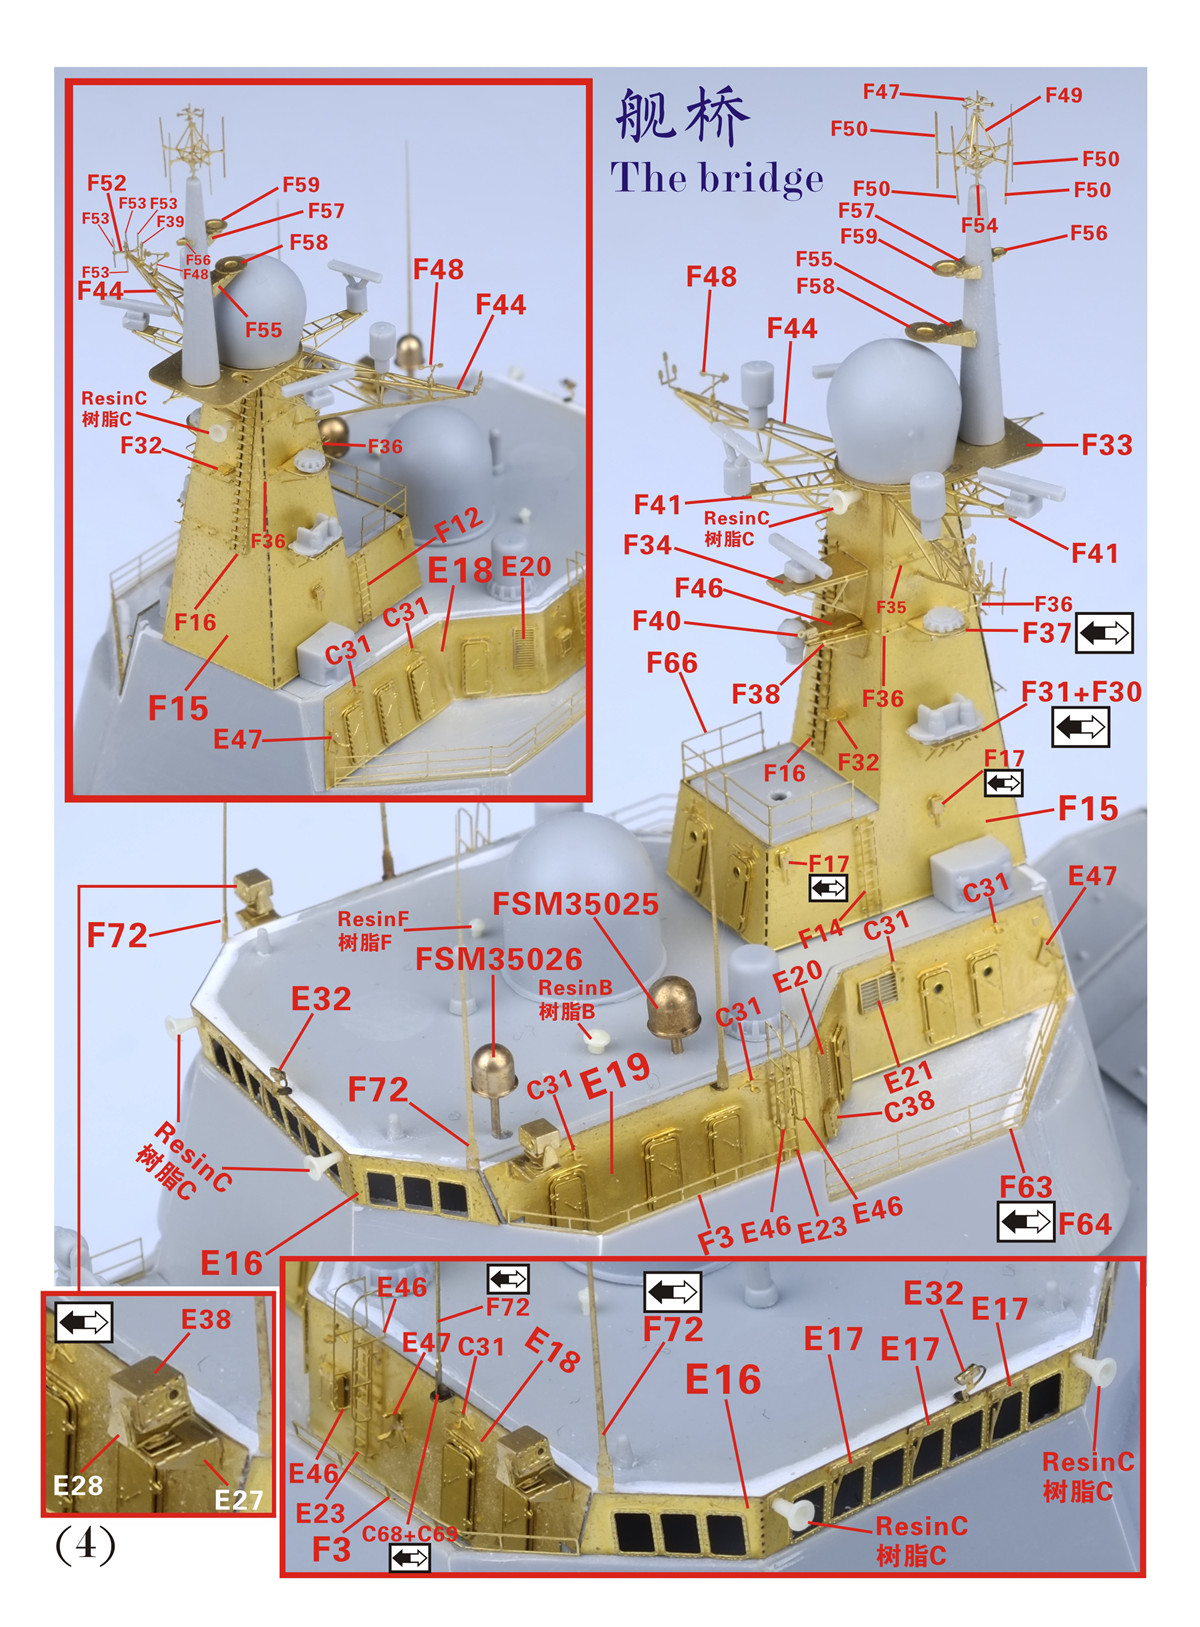 1/350 PLAN Type 052C Destroyer Upgrade Set for Trumpeter 05430 - Click Image to Close